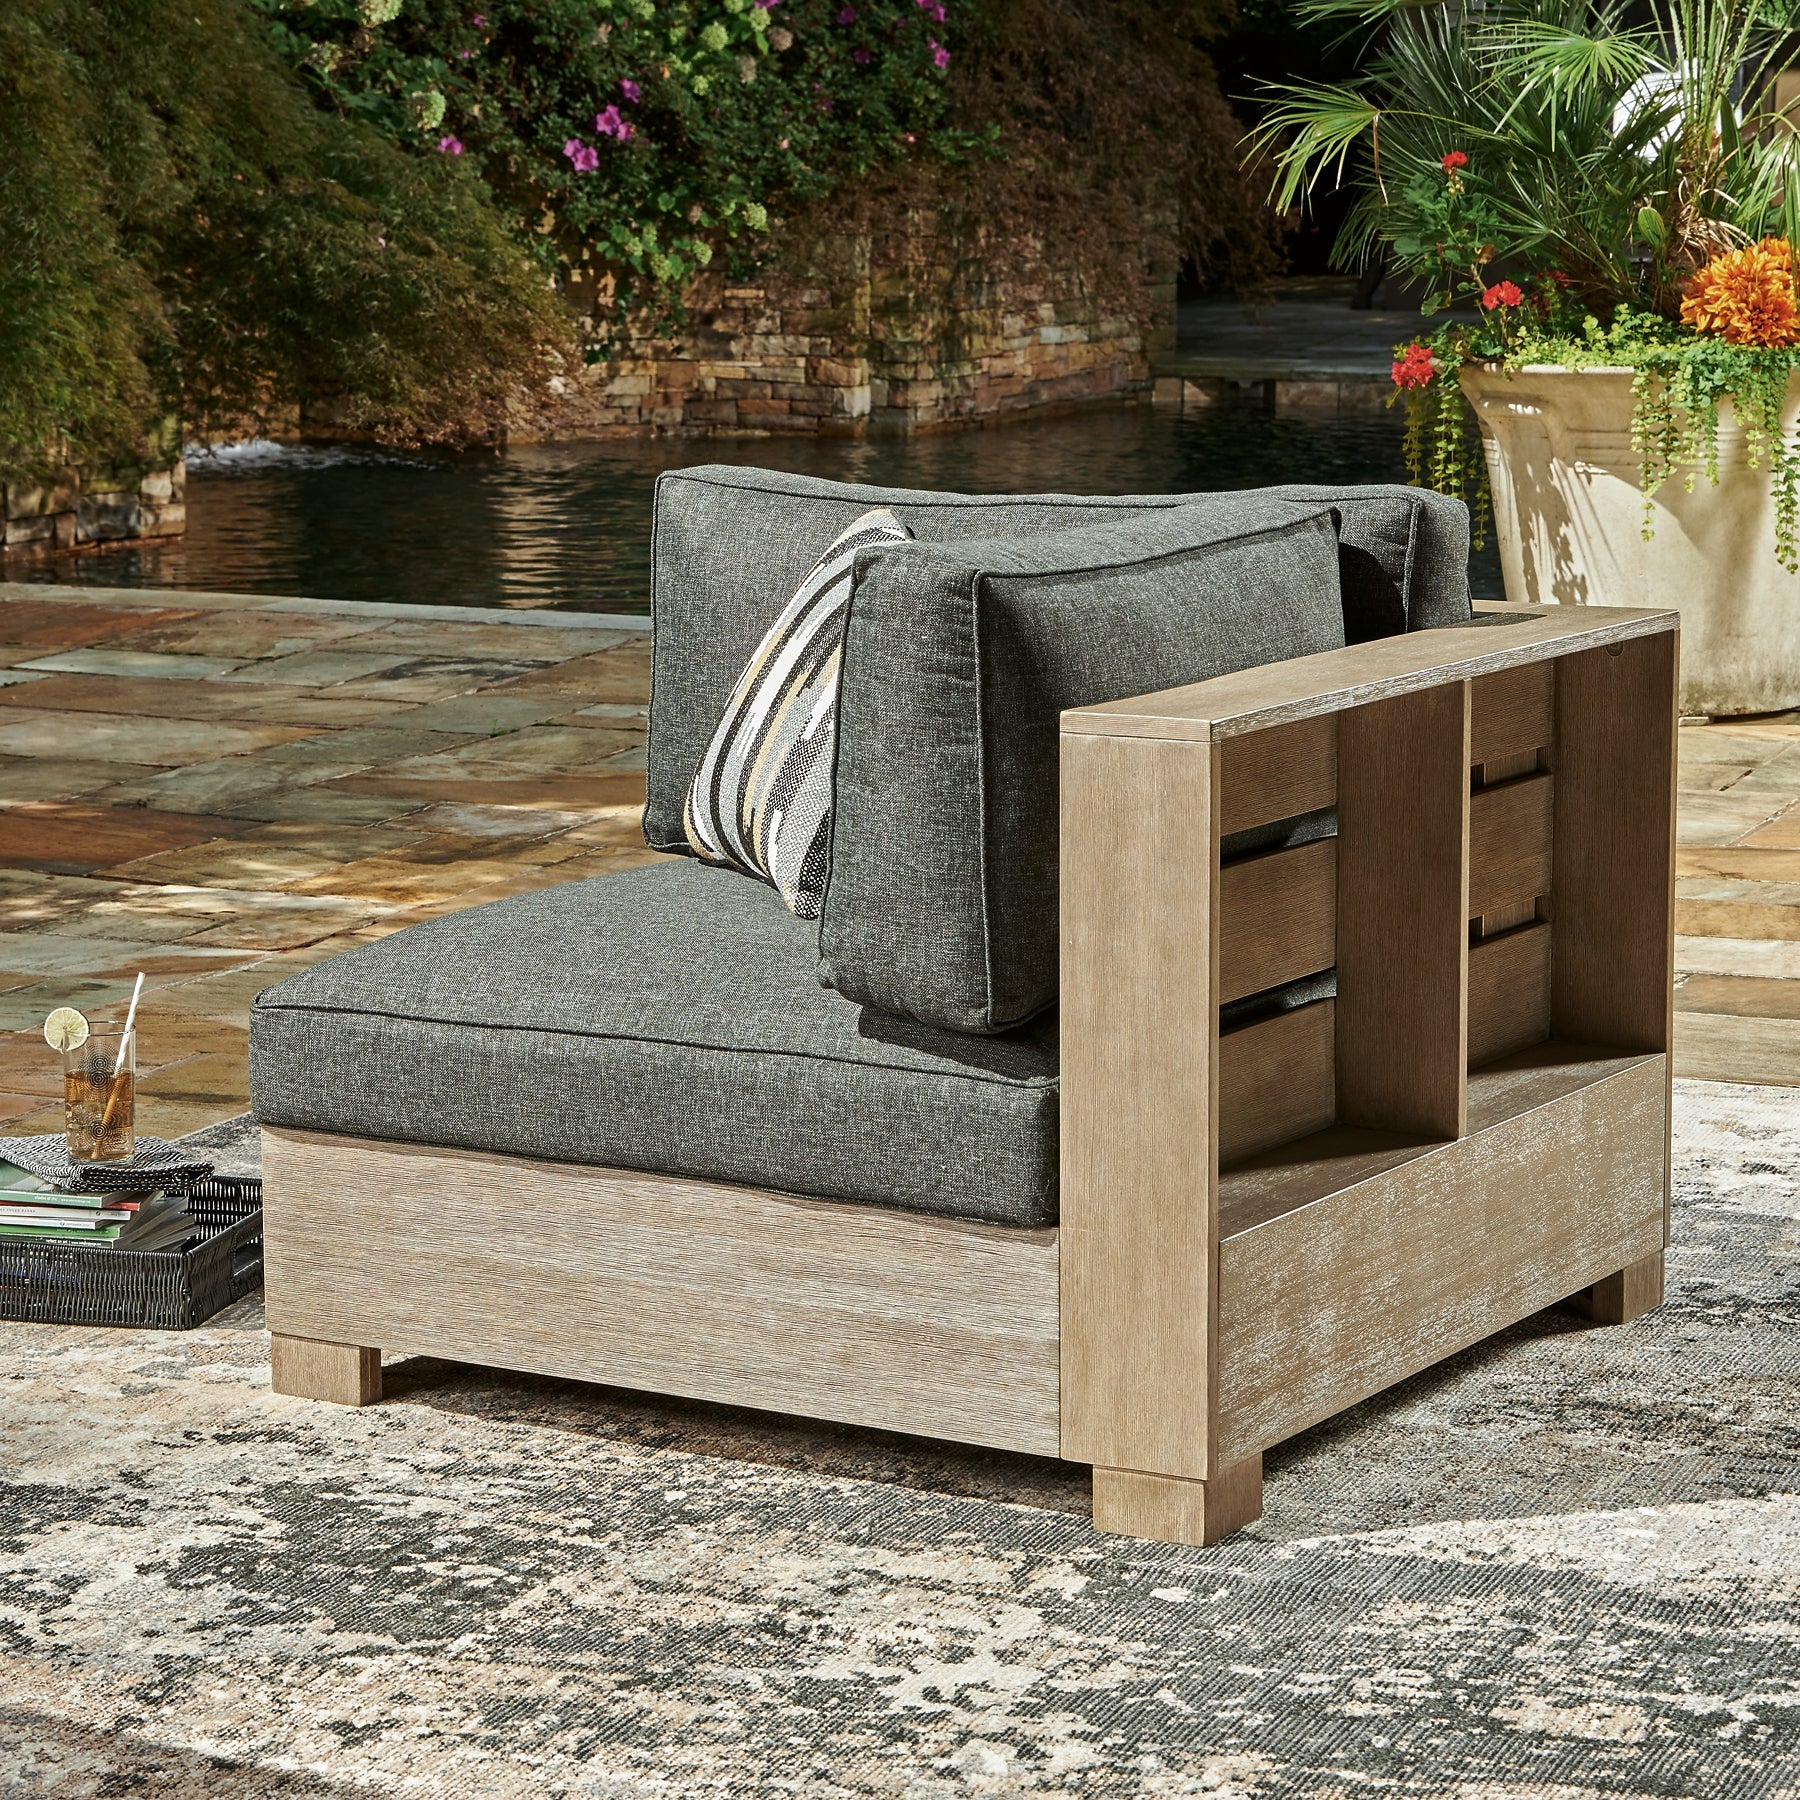 Citrine Park 5-Piece Outdoor Sectional with Ottoman JB's Furniture  Home Furniture, Home Decor, Furniture Store